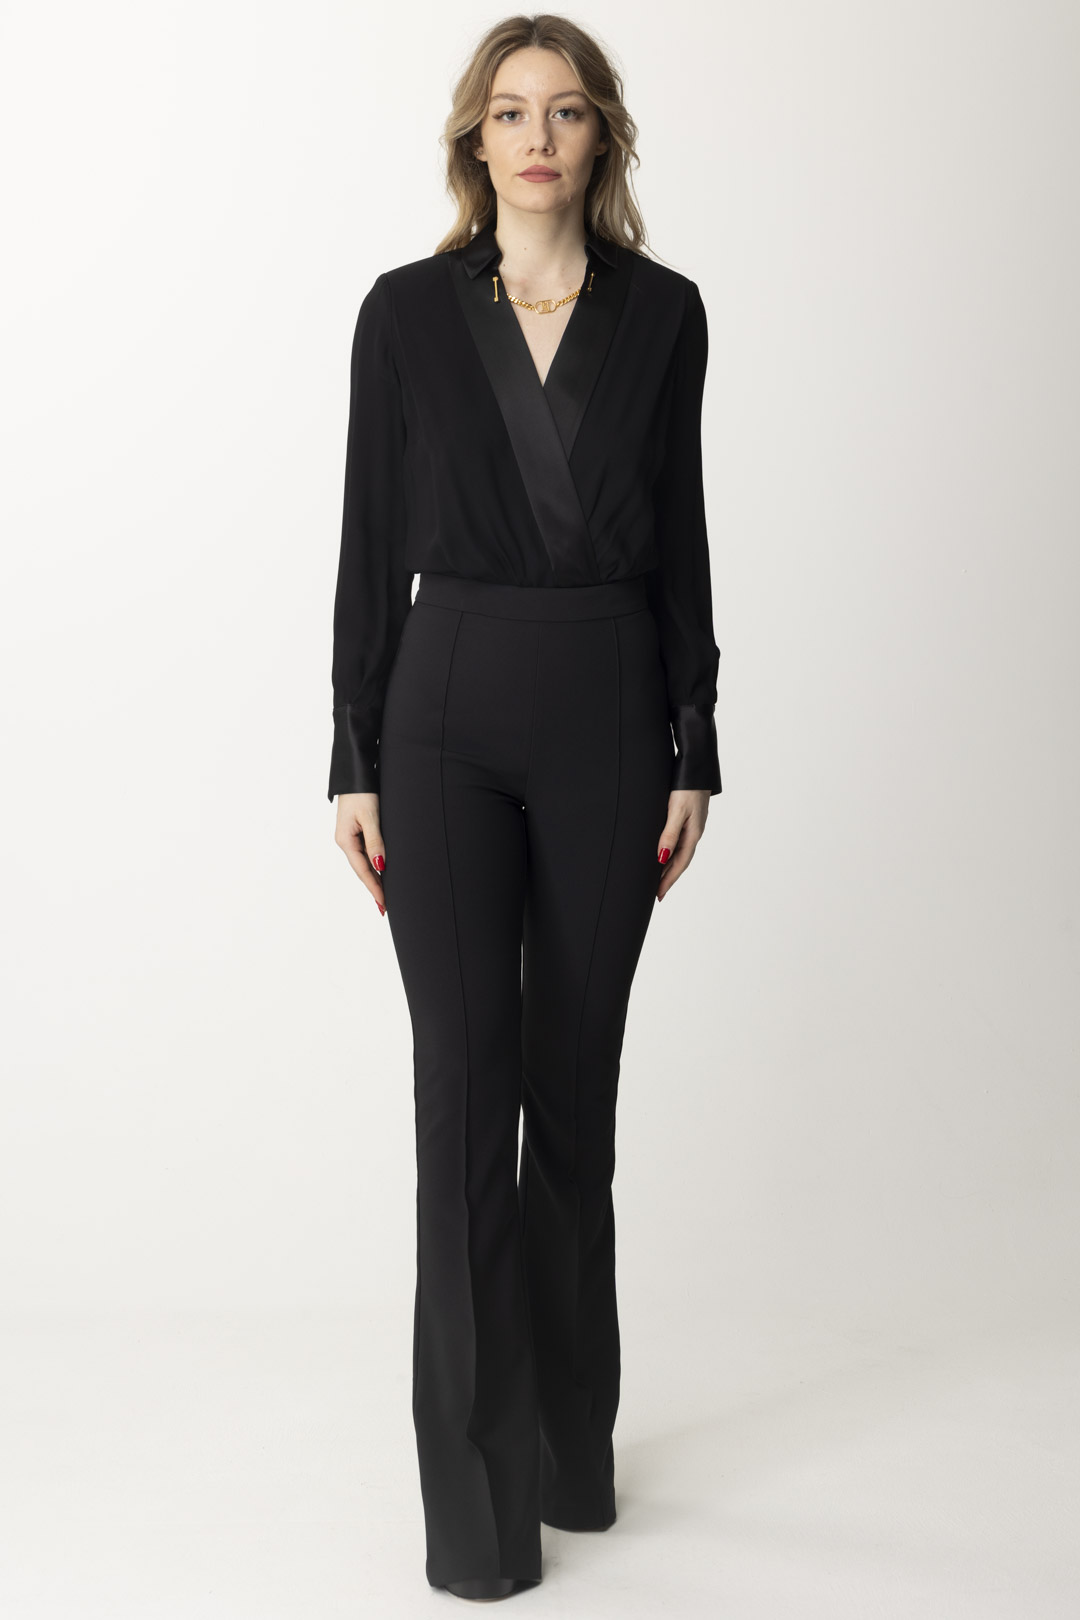 Preview: Elisabetta Franchi Combined Jumpsuit with Collar Accessory Nero